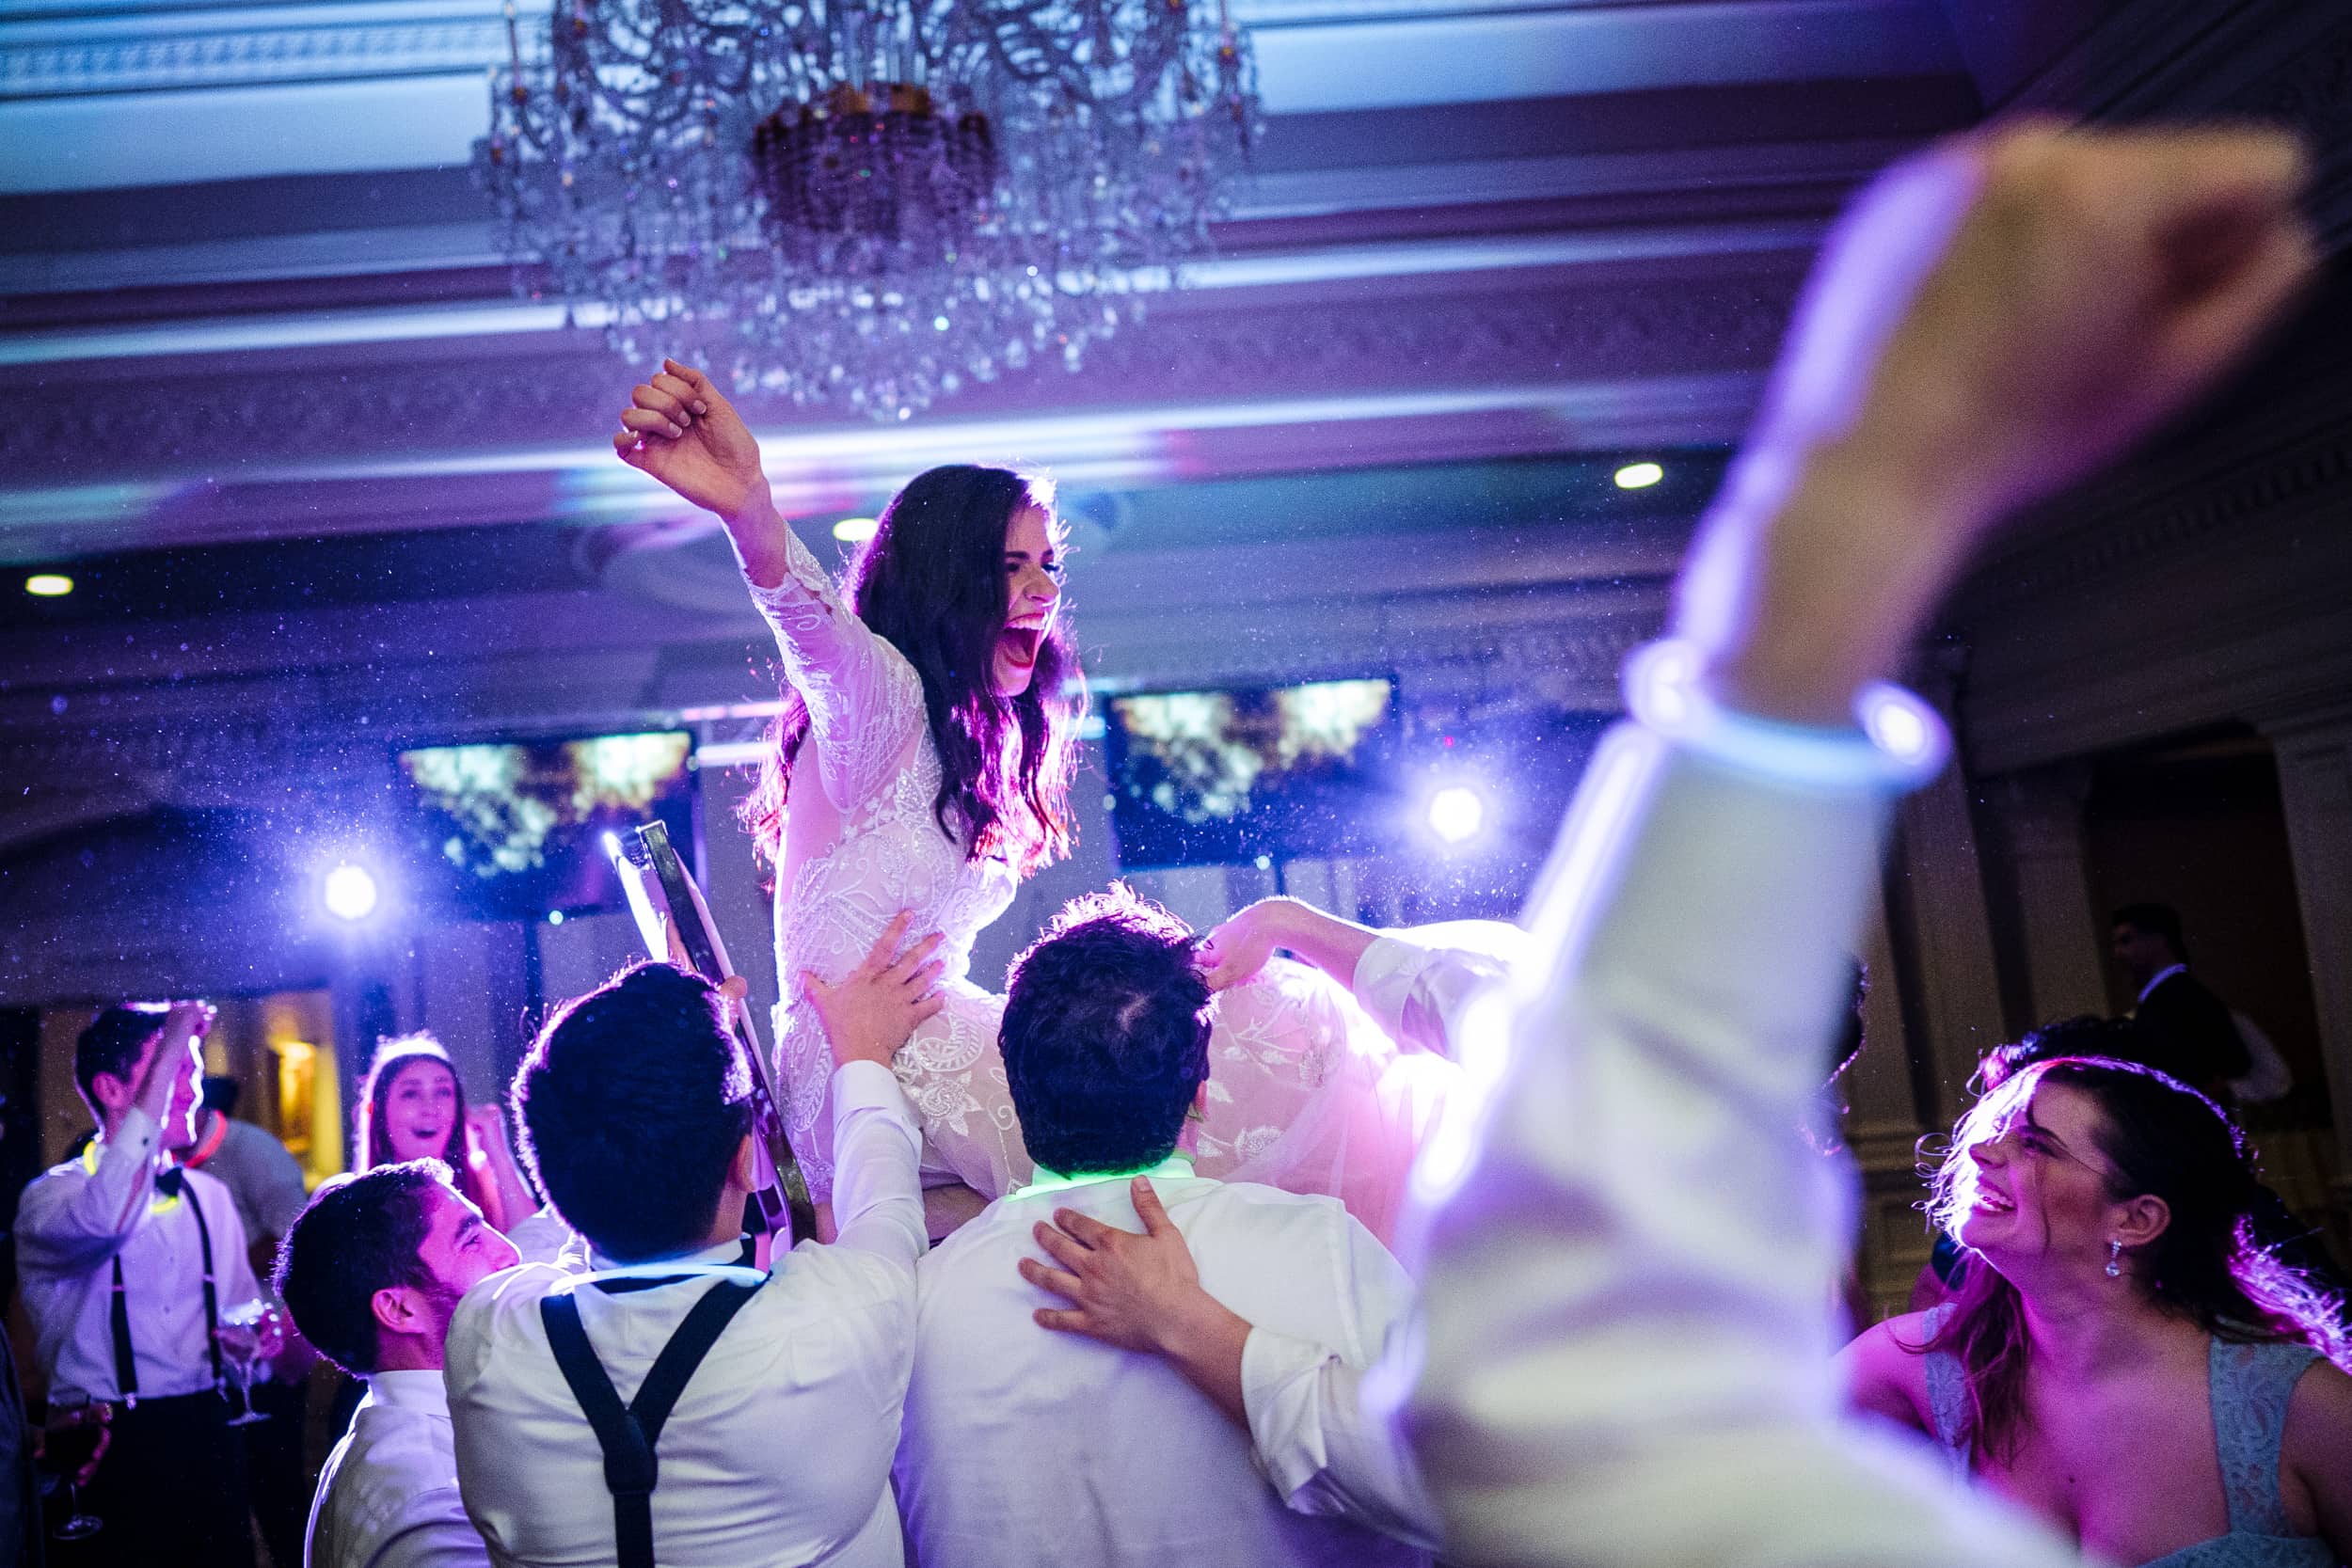 Phoenix Wedding Photography by JD Land of a bride crowd surfing and partying it up at her reception